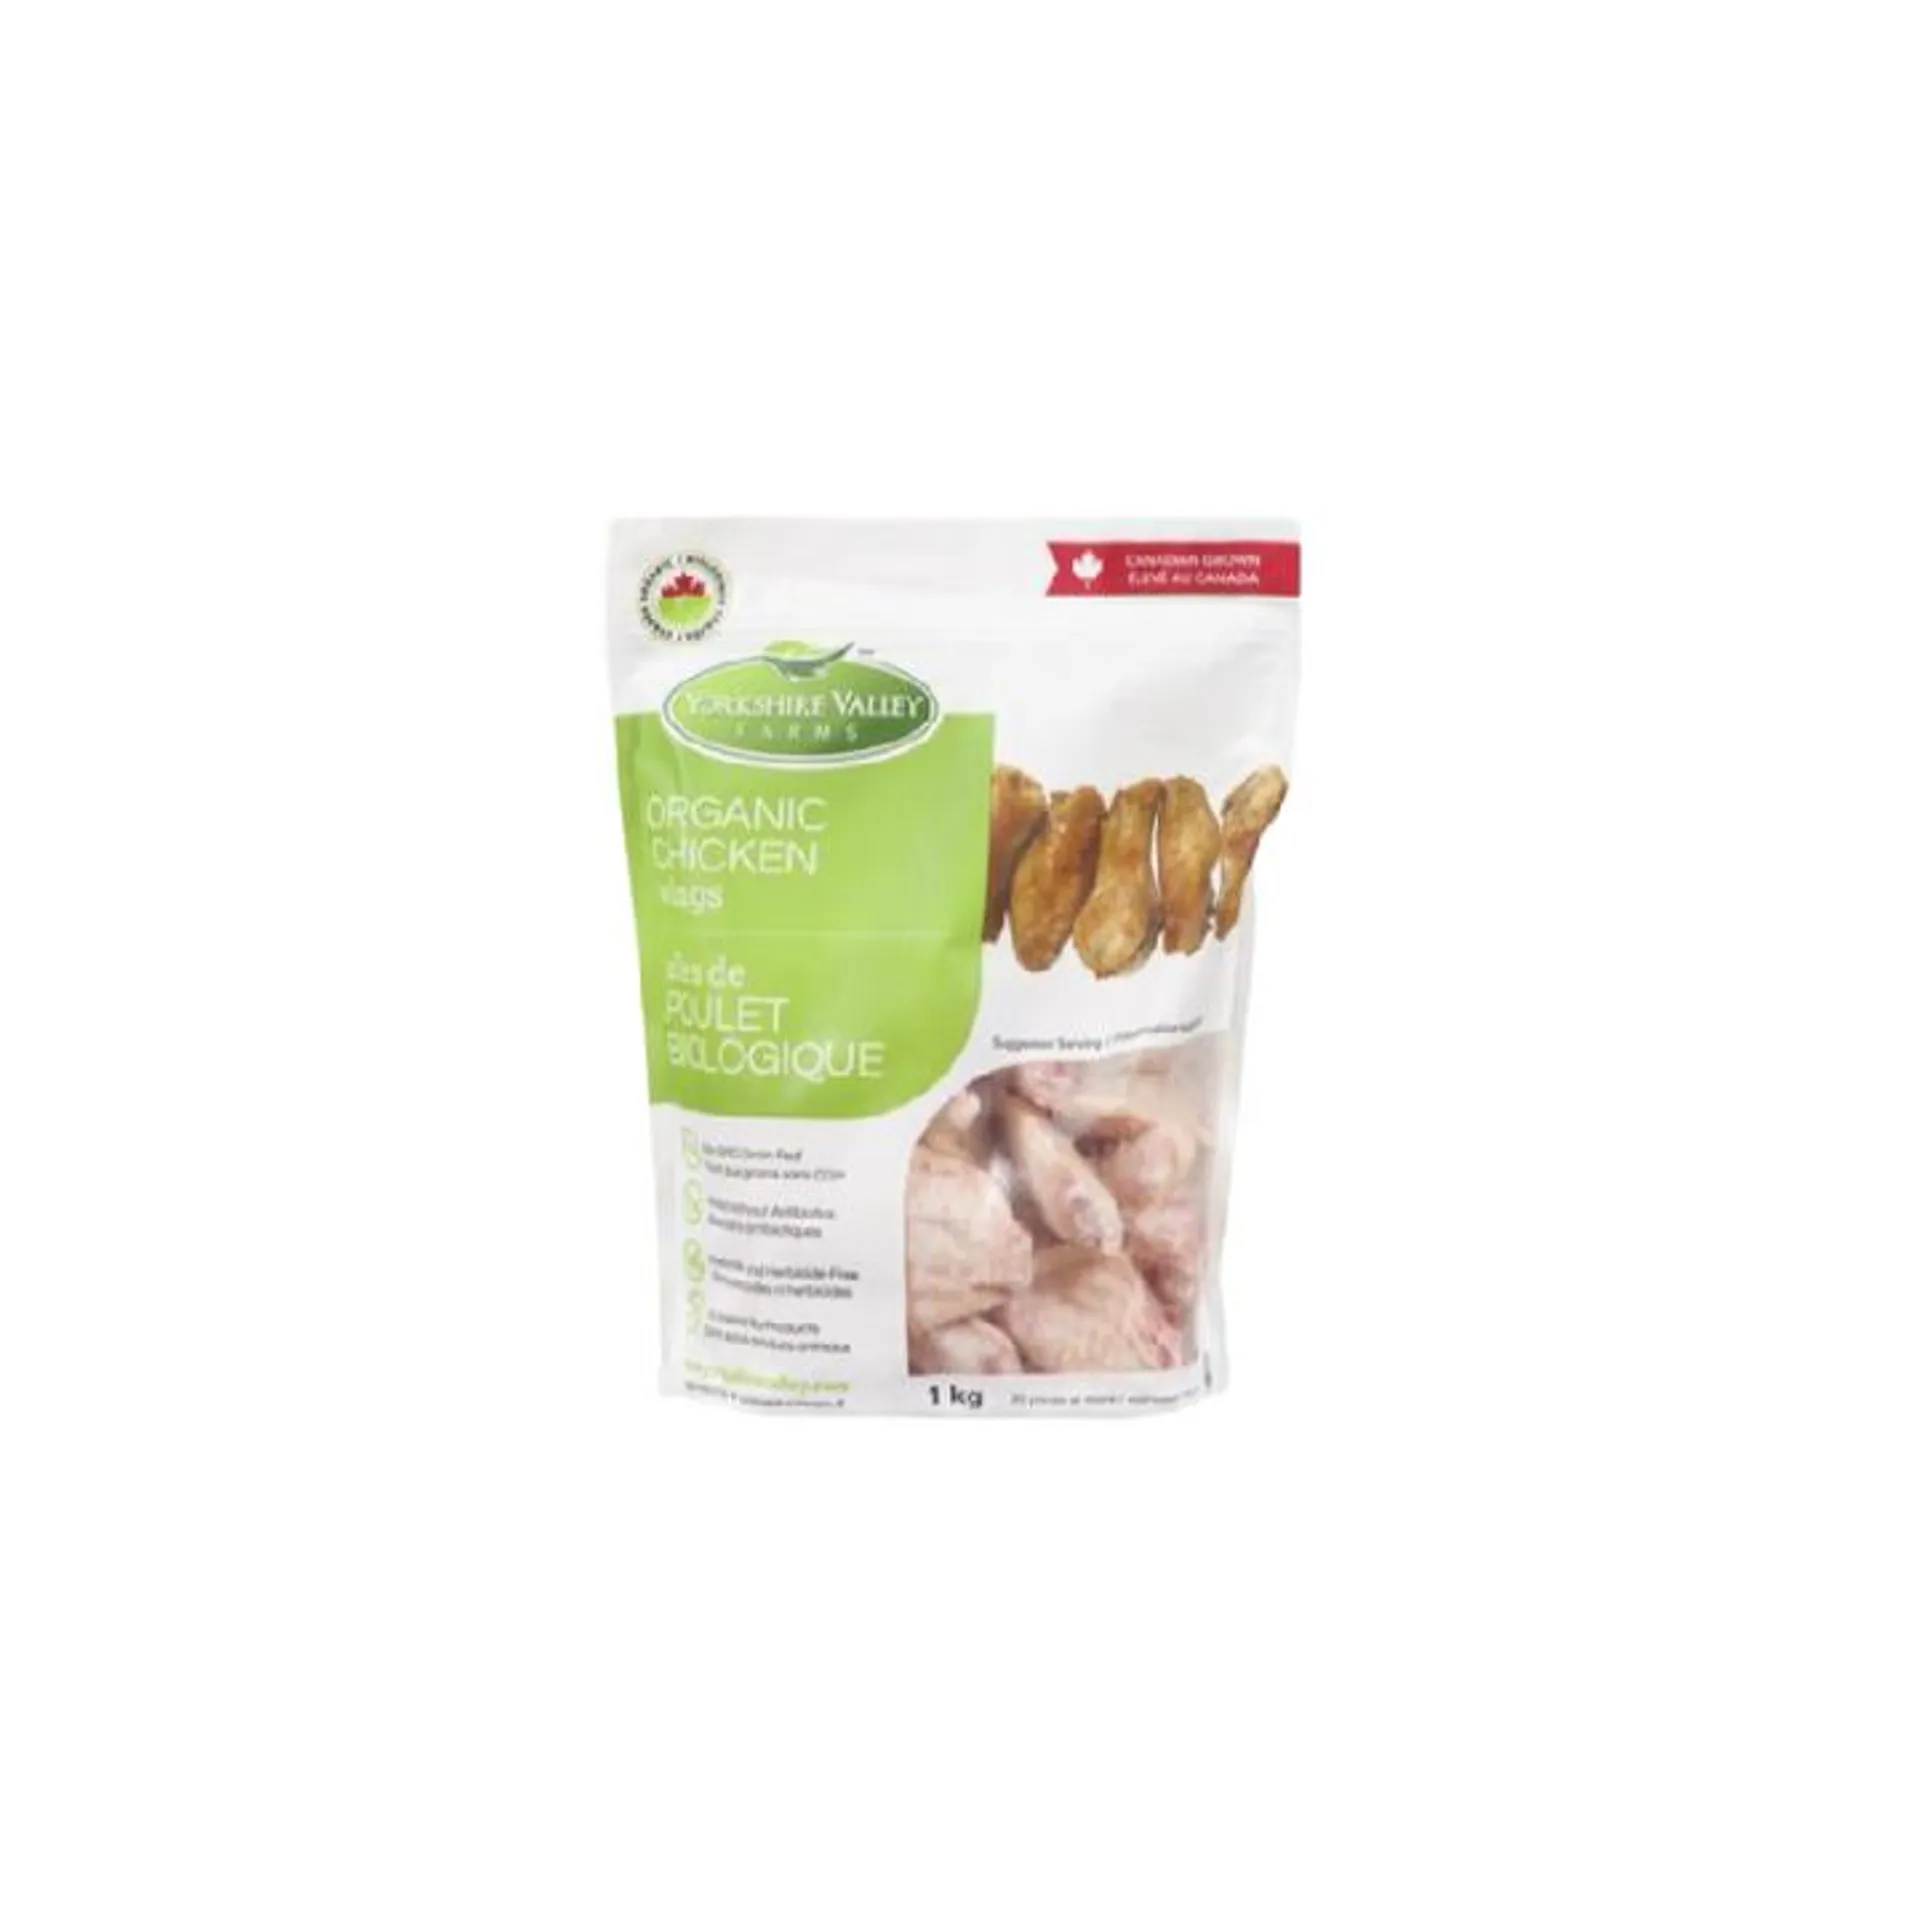 YORKSHIRE VALLEY FARMS Organic Chicken Wings 1kg